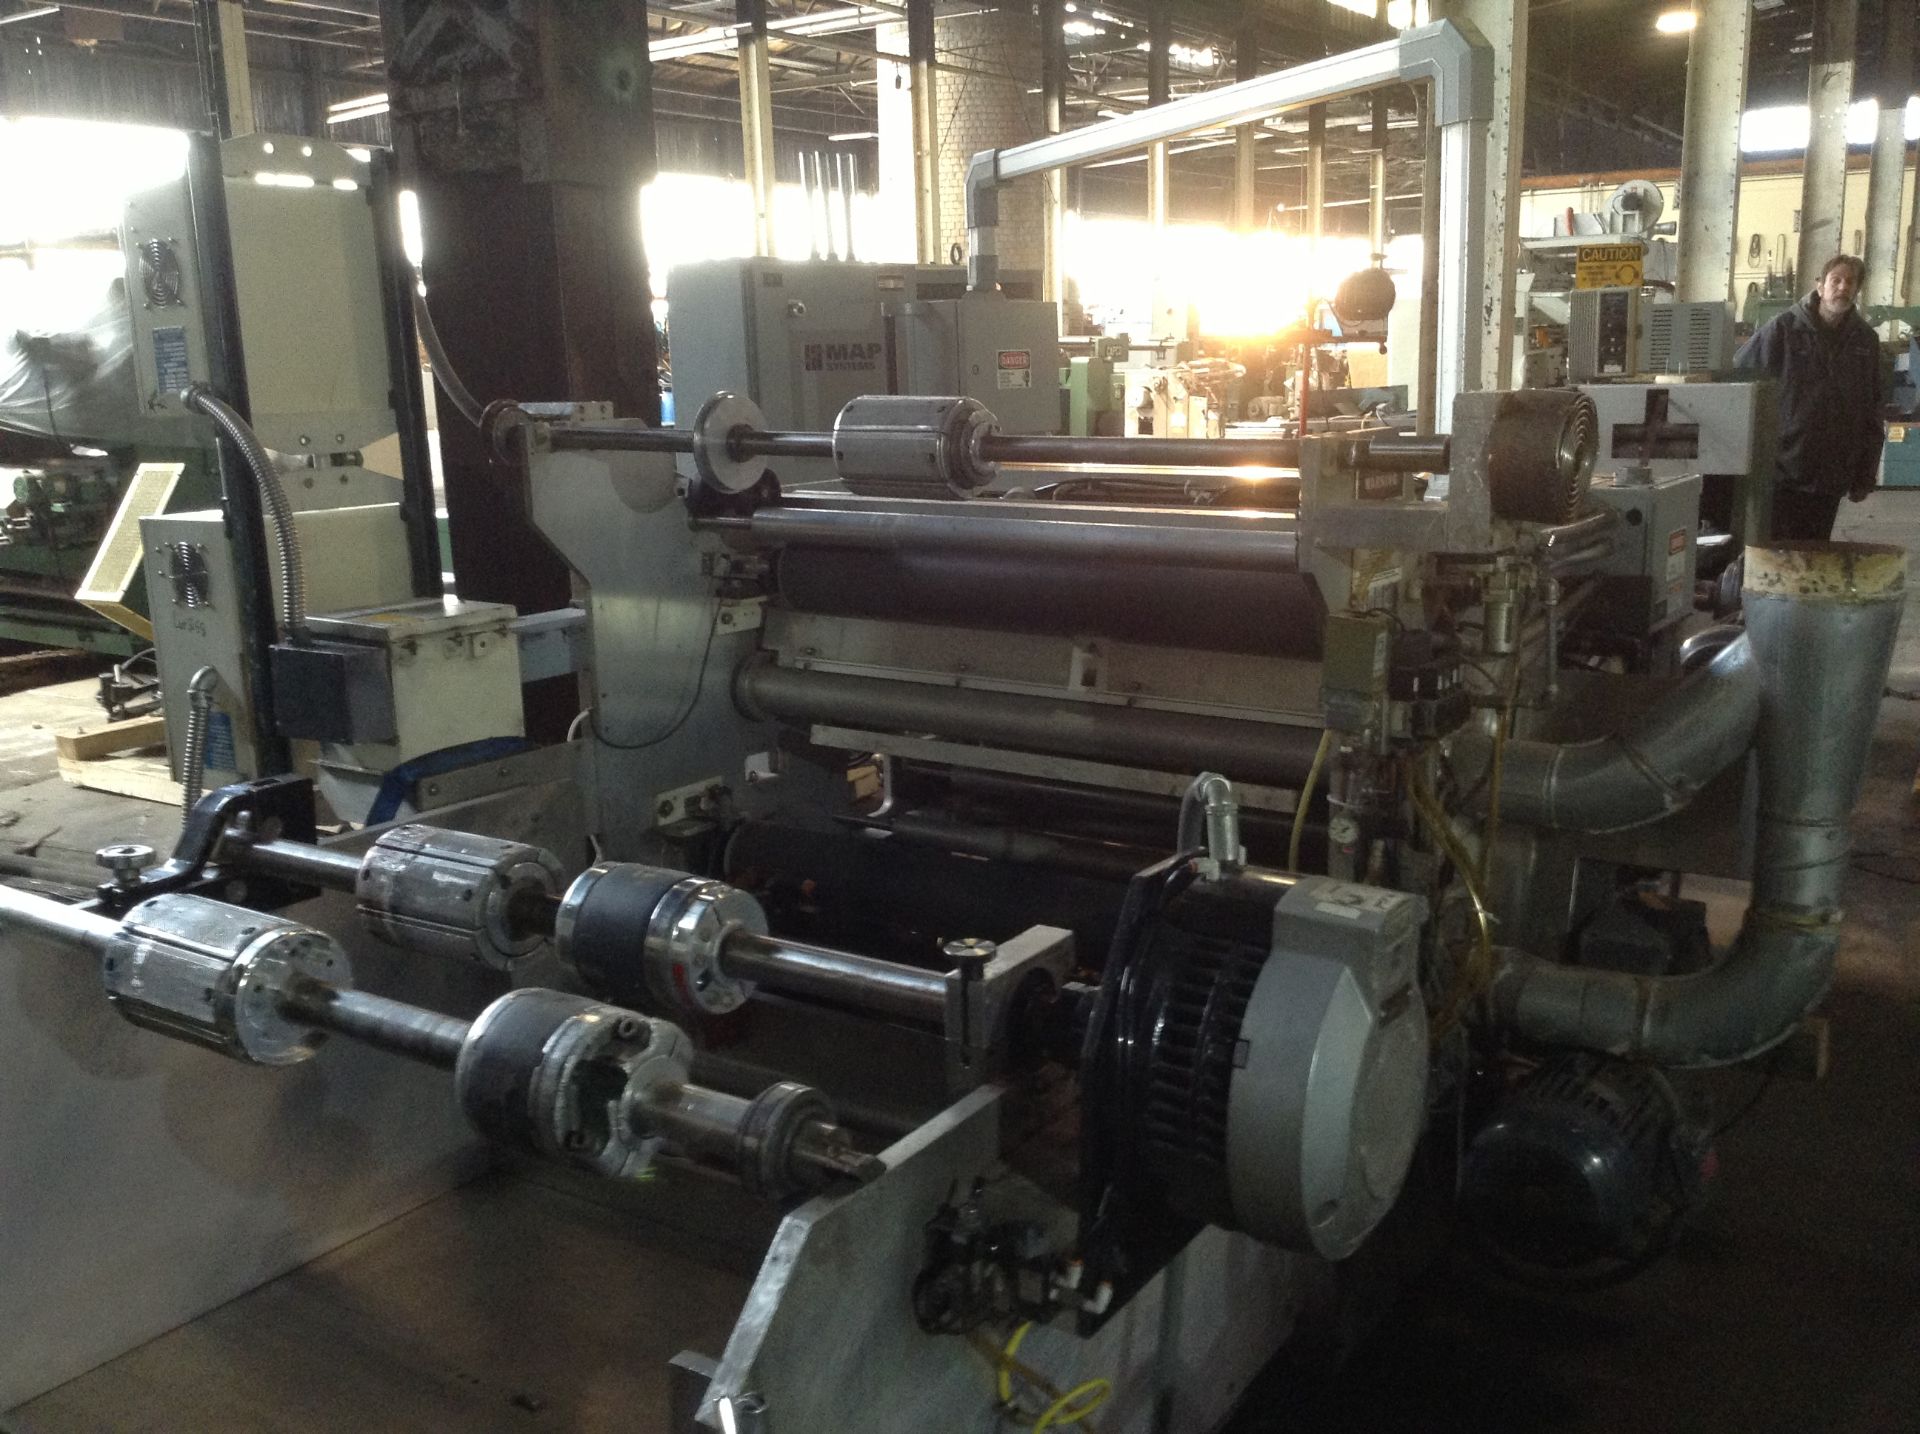 42” Redex laminator. 2-ply thermal lamination system. Age 1999. Model Thermo Lam 3. MAP Systems